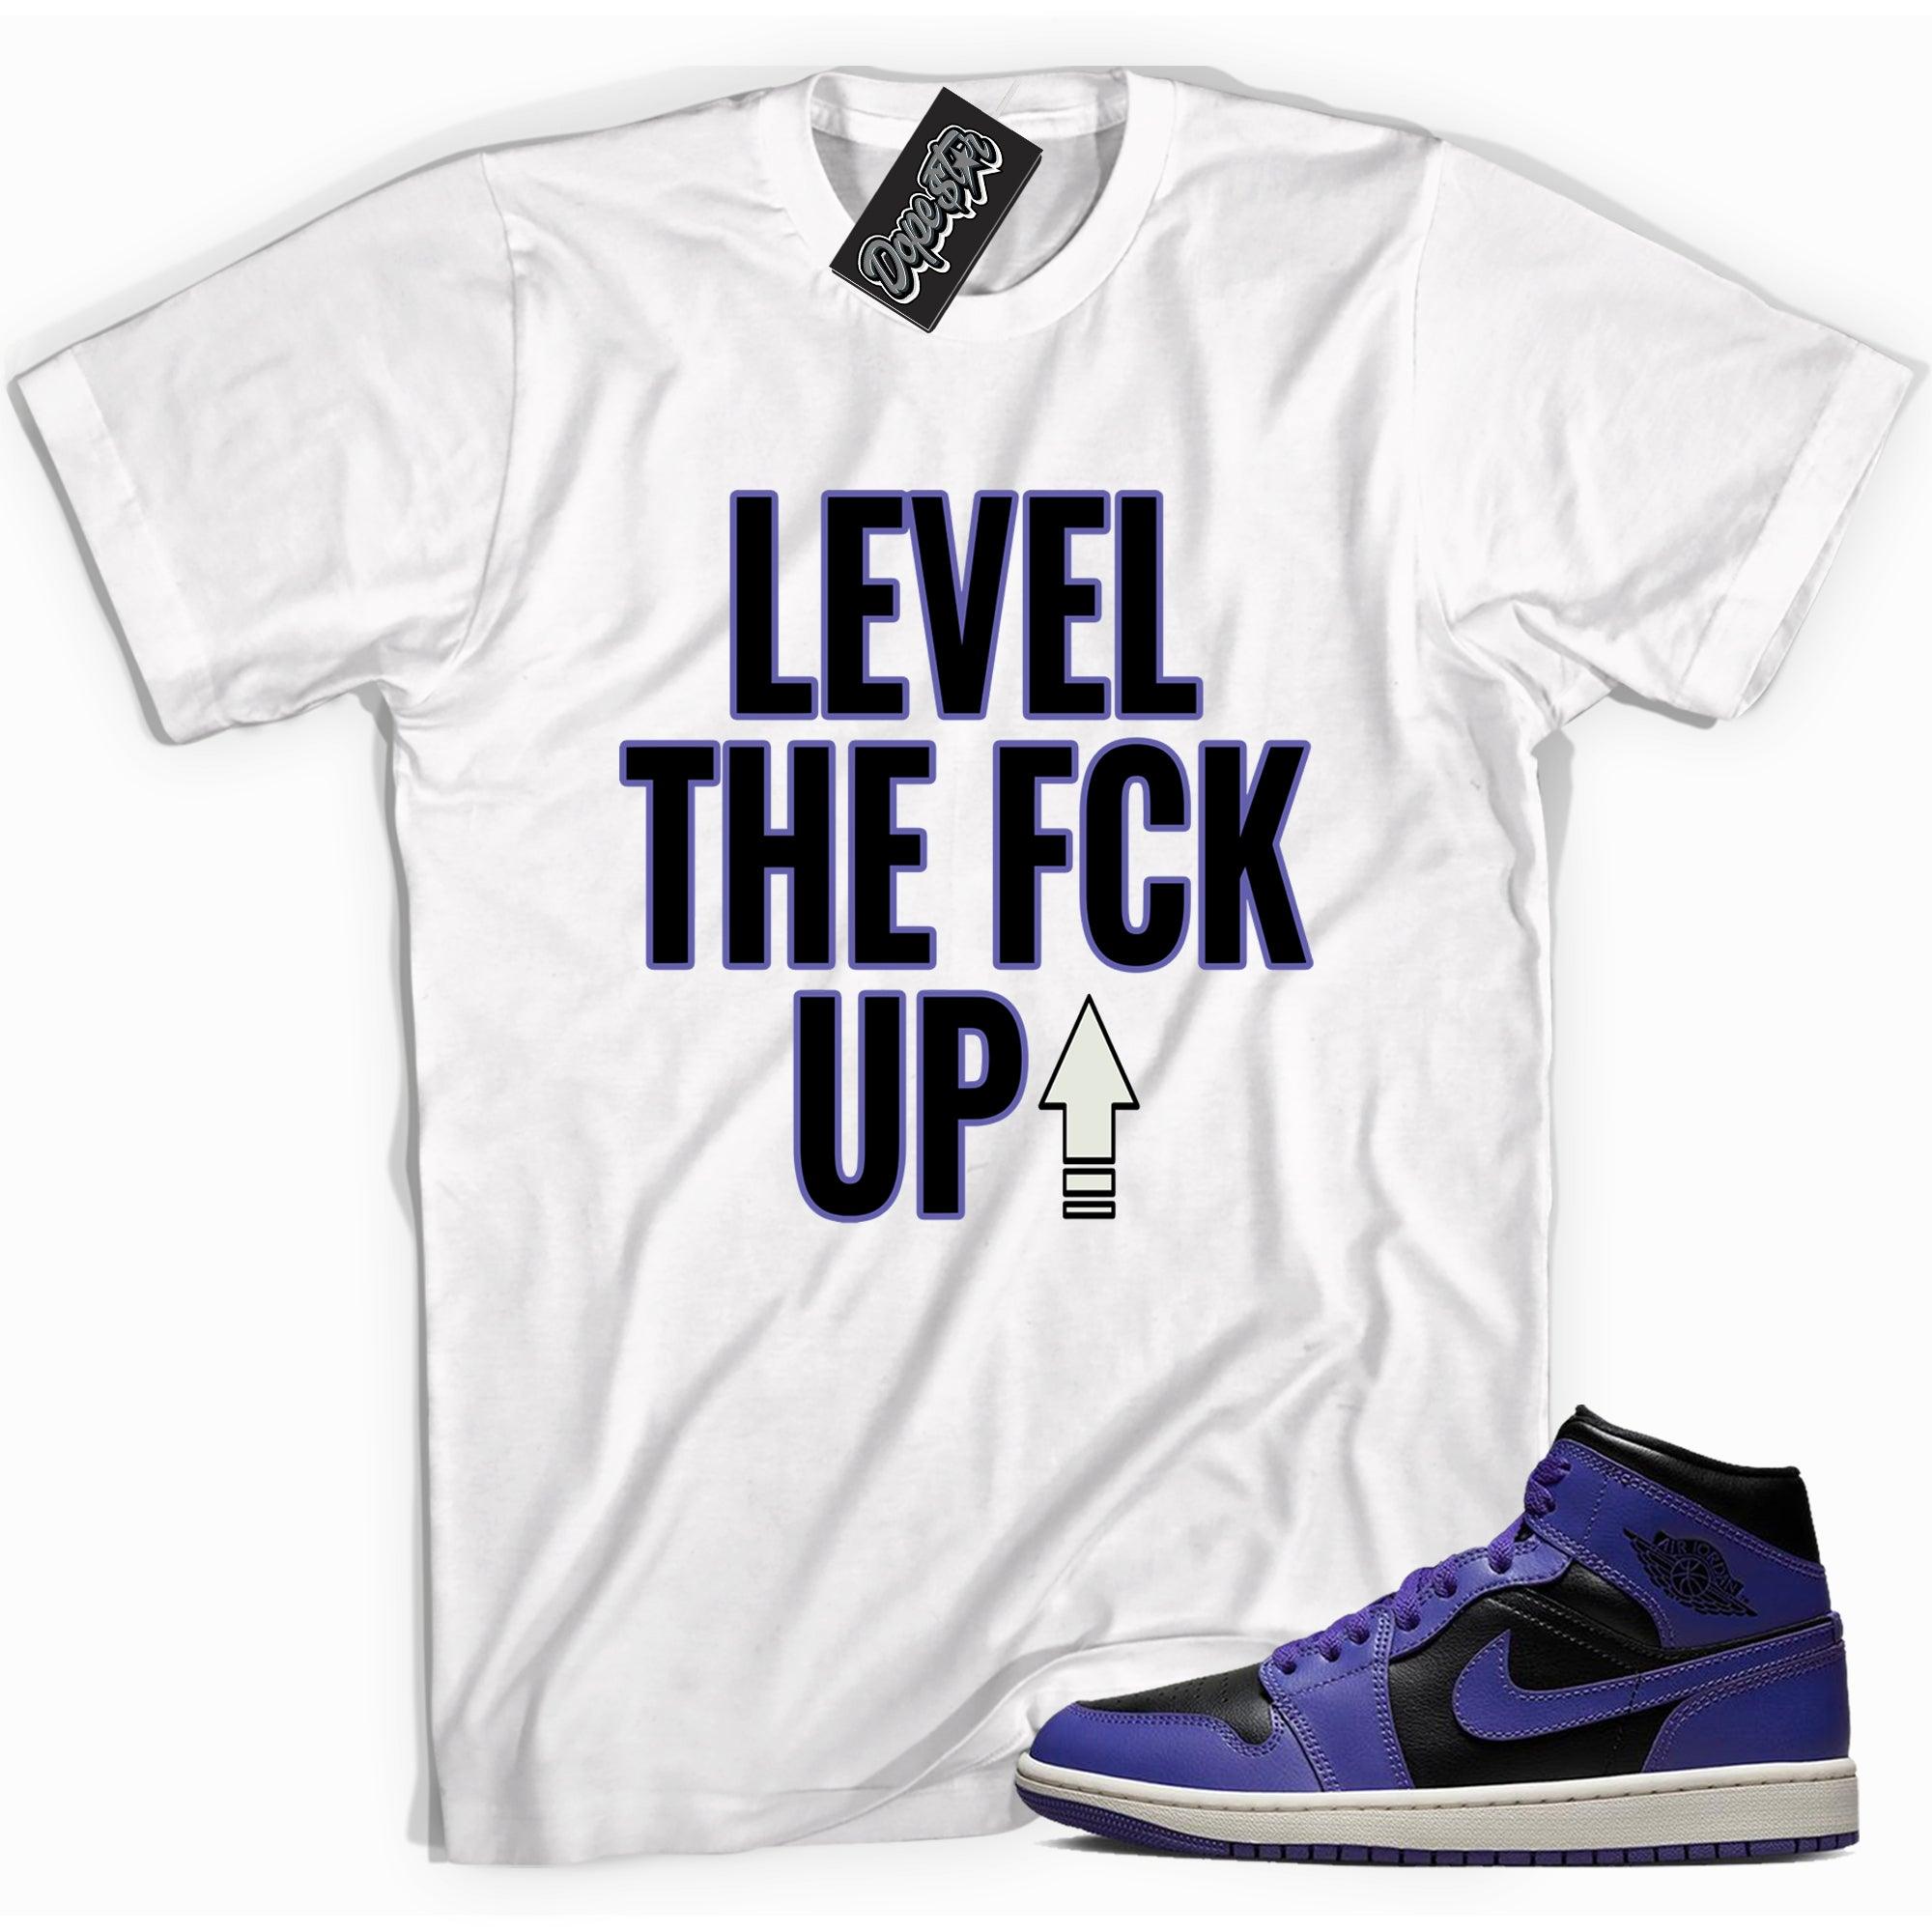 Cool white graphic tee with 'level up' print, that perfectly matches Air Jordan 1 Mid Purple Black sneakers.